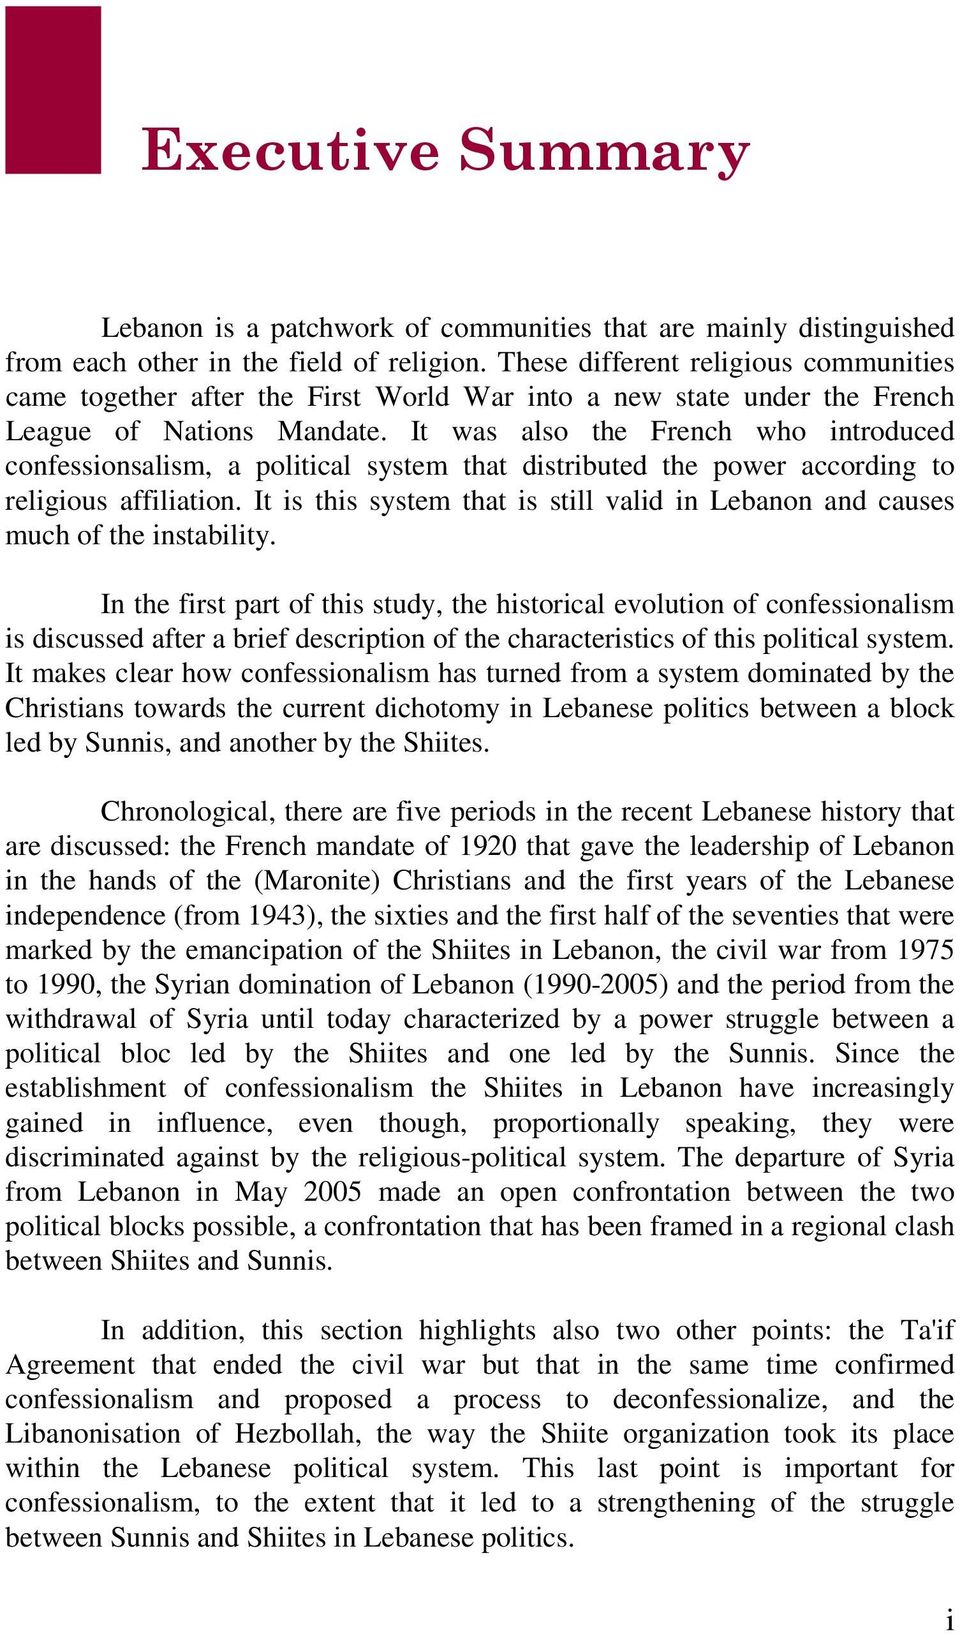 It was also the French who introduced confessionsalism, a political system that distributed the power according to religious affiliation.